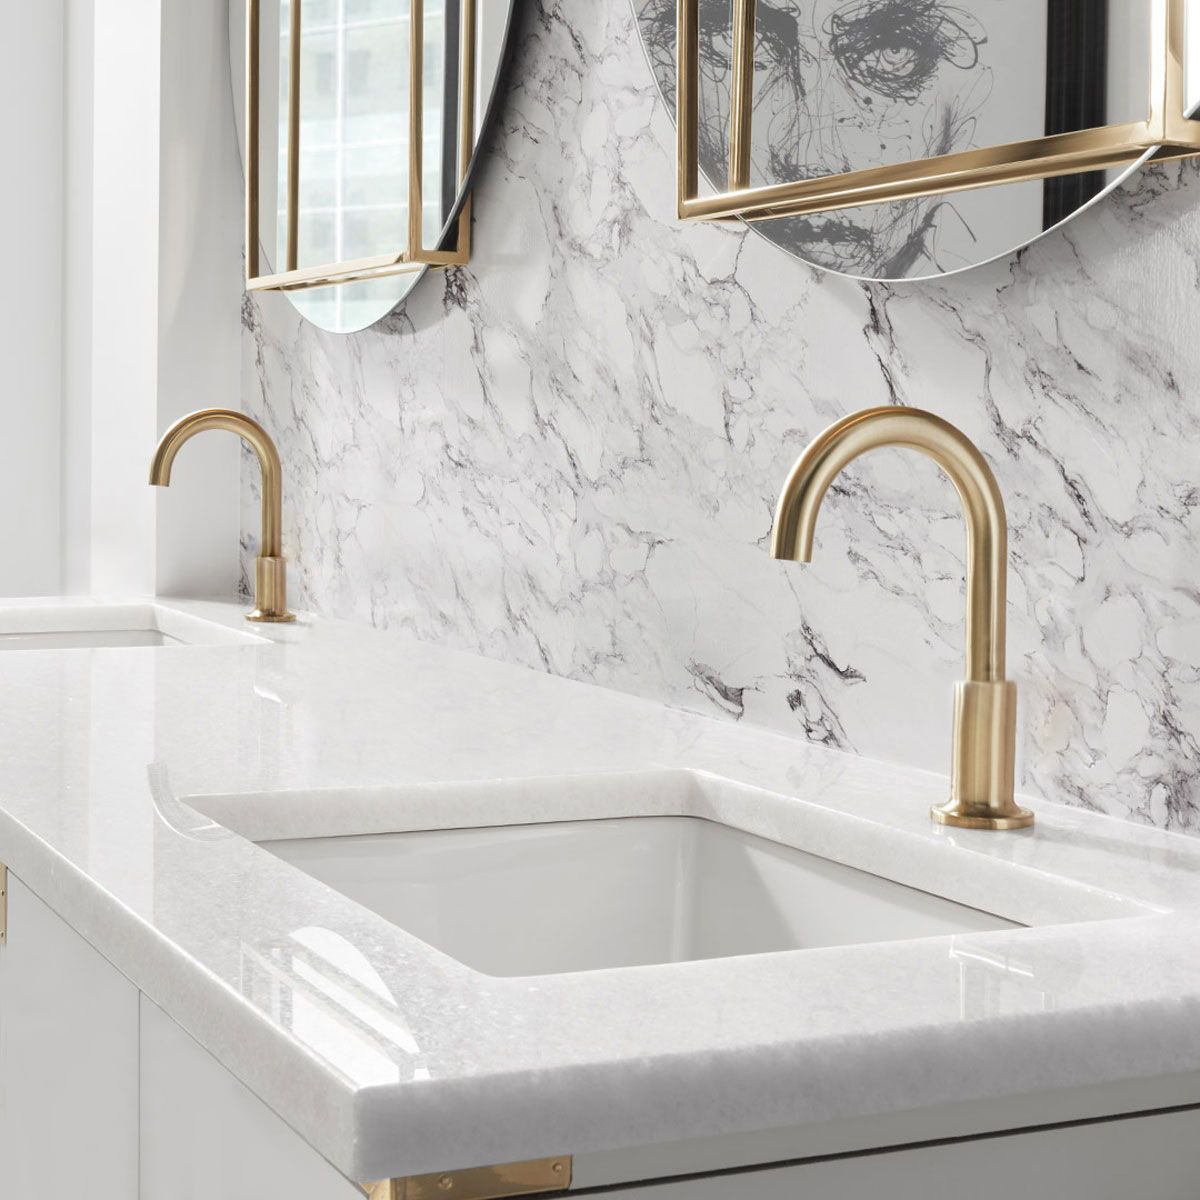 Fontana Commercial Brushed Gold Touchless Automatic Sensor Hands-Free Faucet